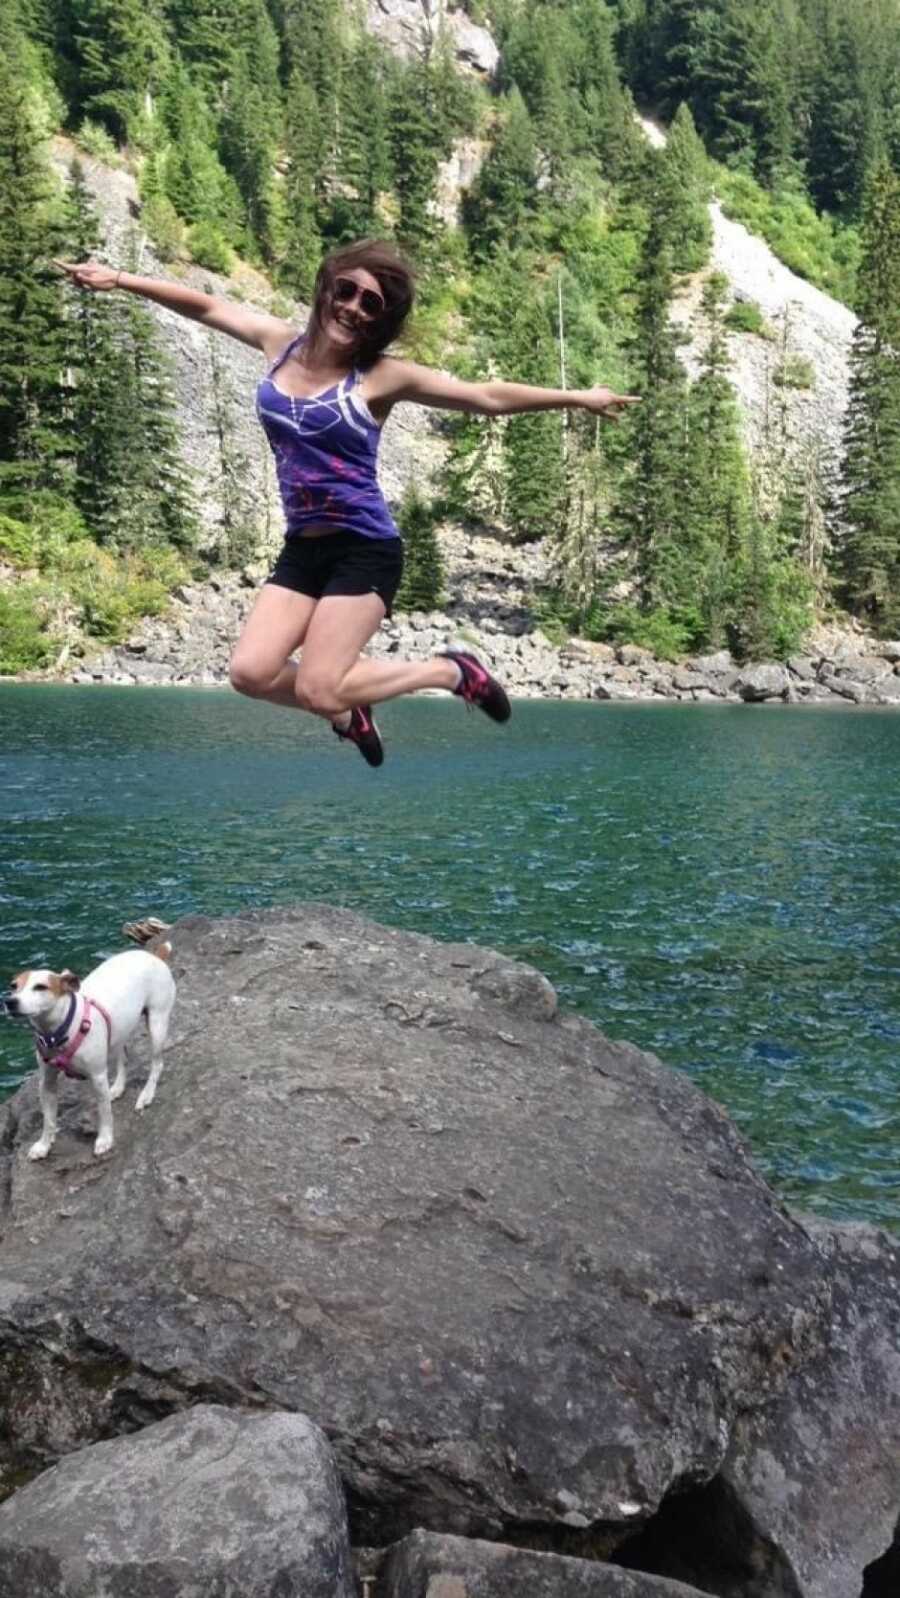 woman out hiking with a white dog and jumping on a rock